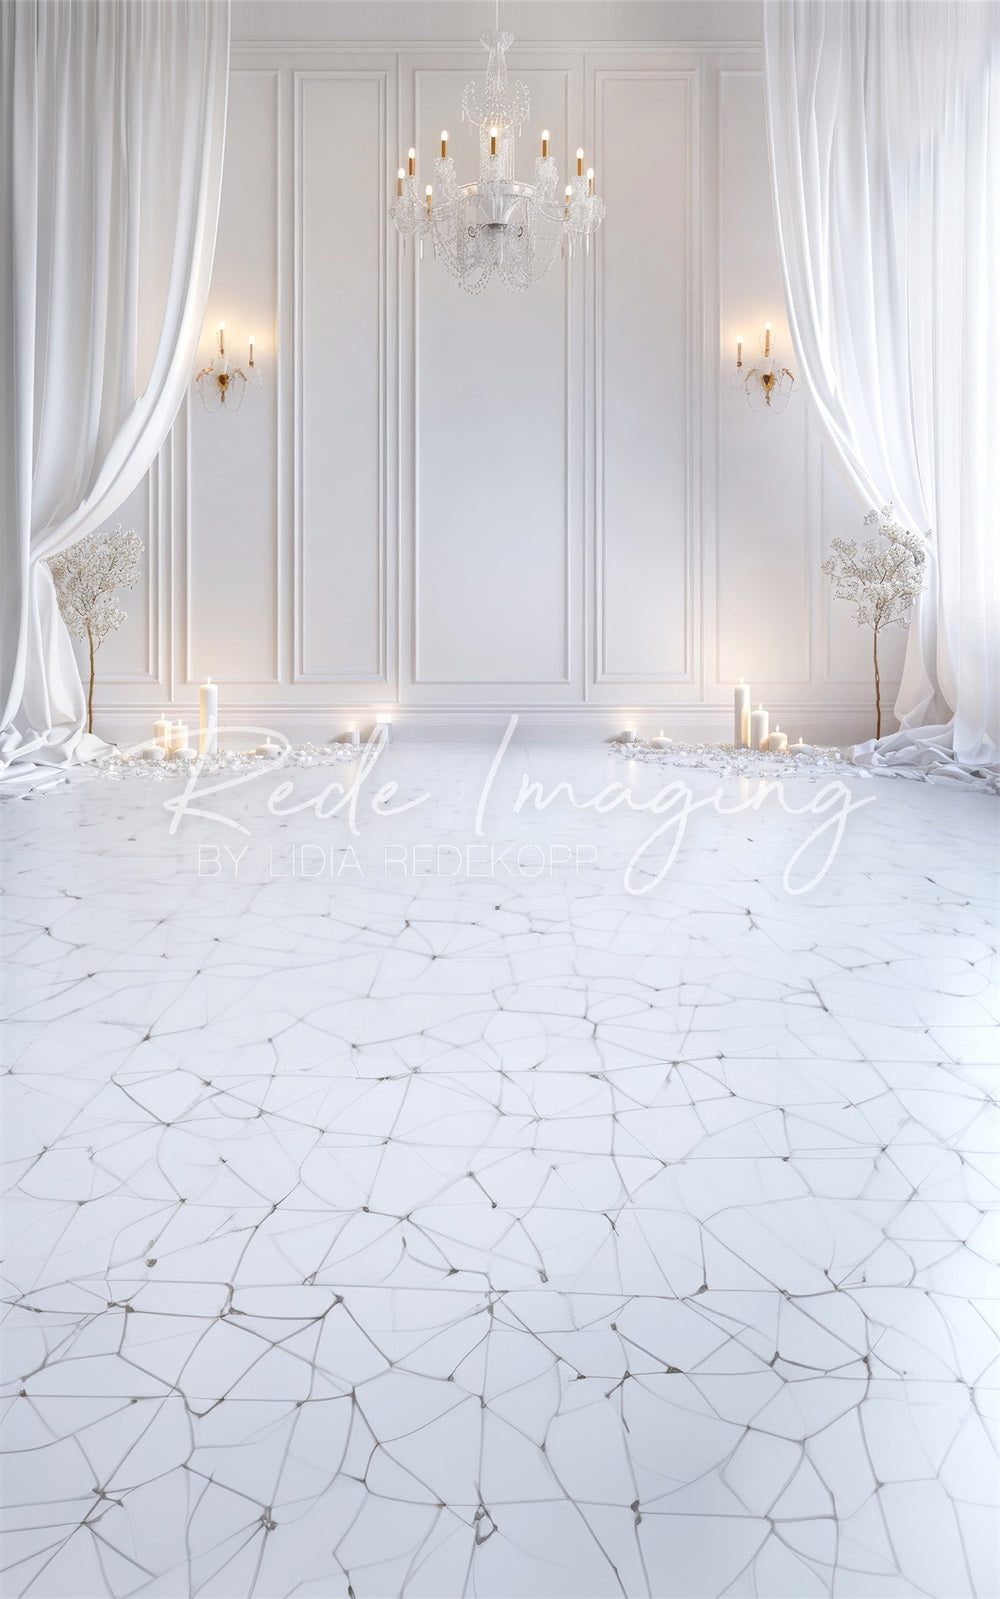 Kate Sweep Retro Elegant White Curtain and Chandelier Backdrop Designed by Lidia Redekopp